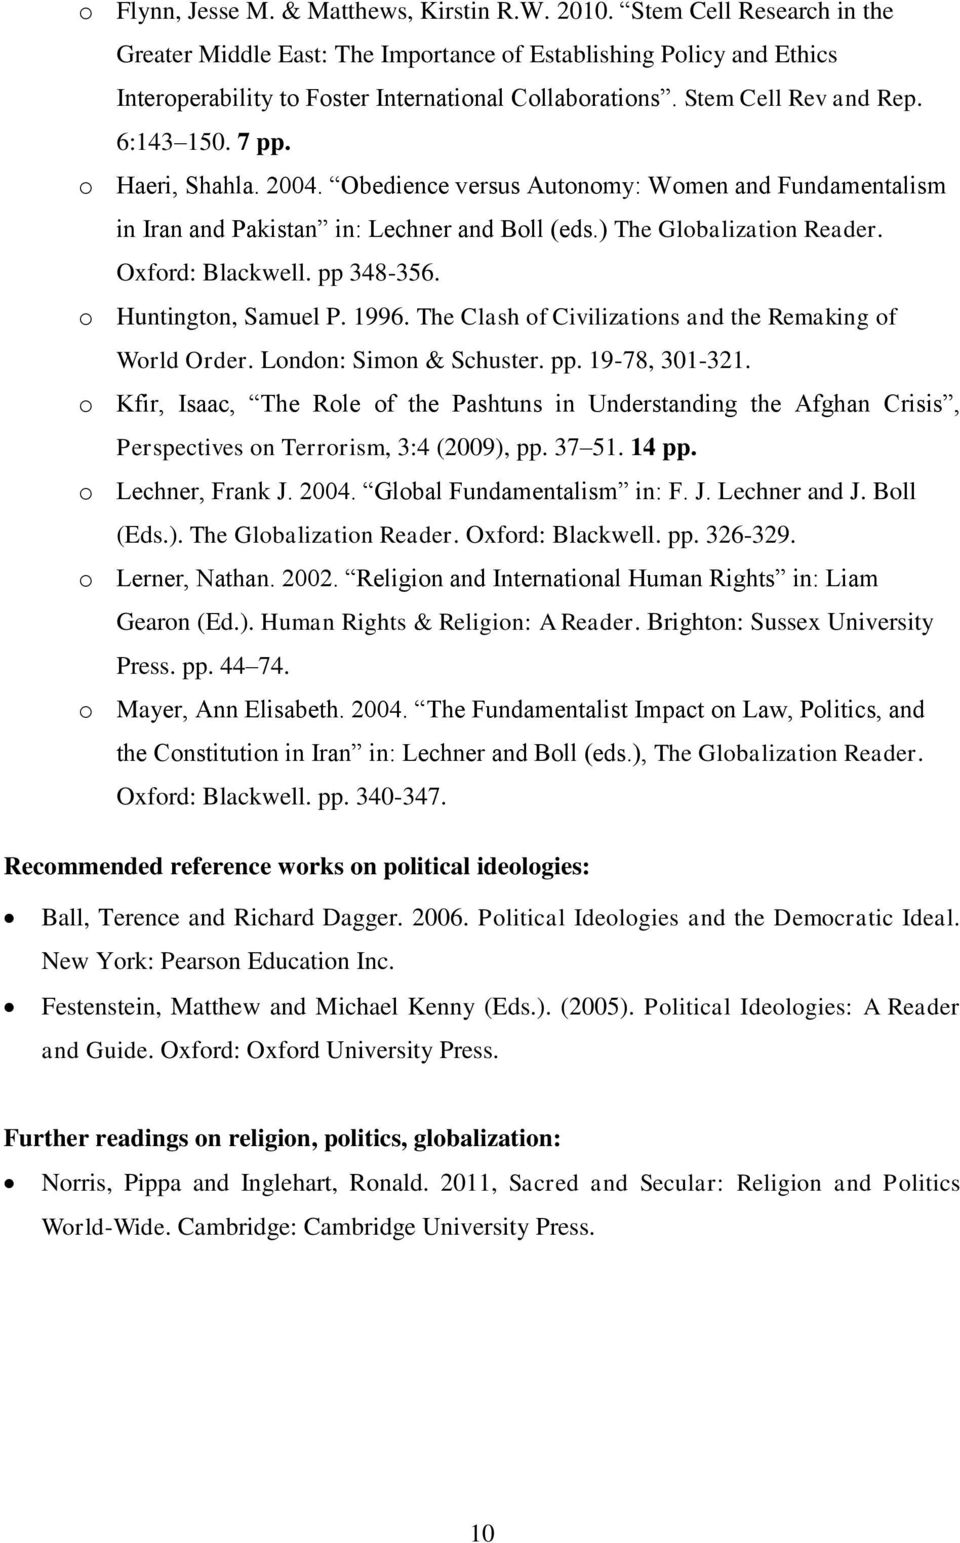 o Haeri, Shahla. 2004. Obedience versus Autonomy: Women and Fundamentalism in Iran and Pakistan in: Lechner and Boll (eds.) The Globalization Reader. Oxford: Blackwell. pp 348-356.